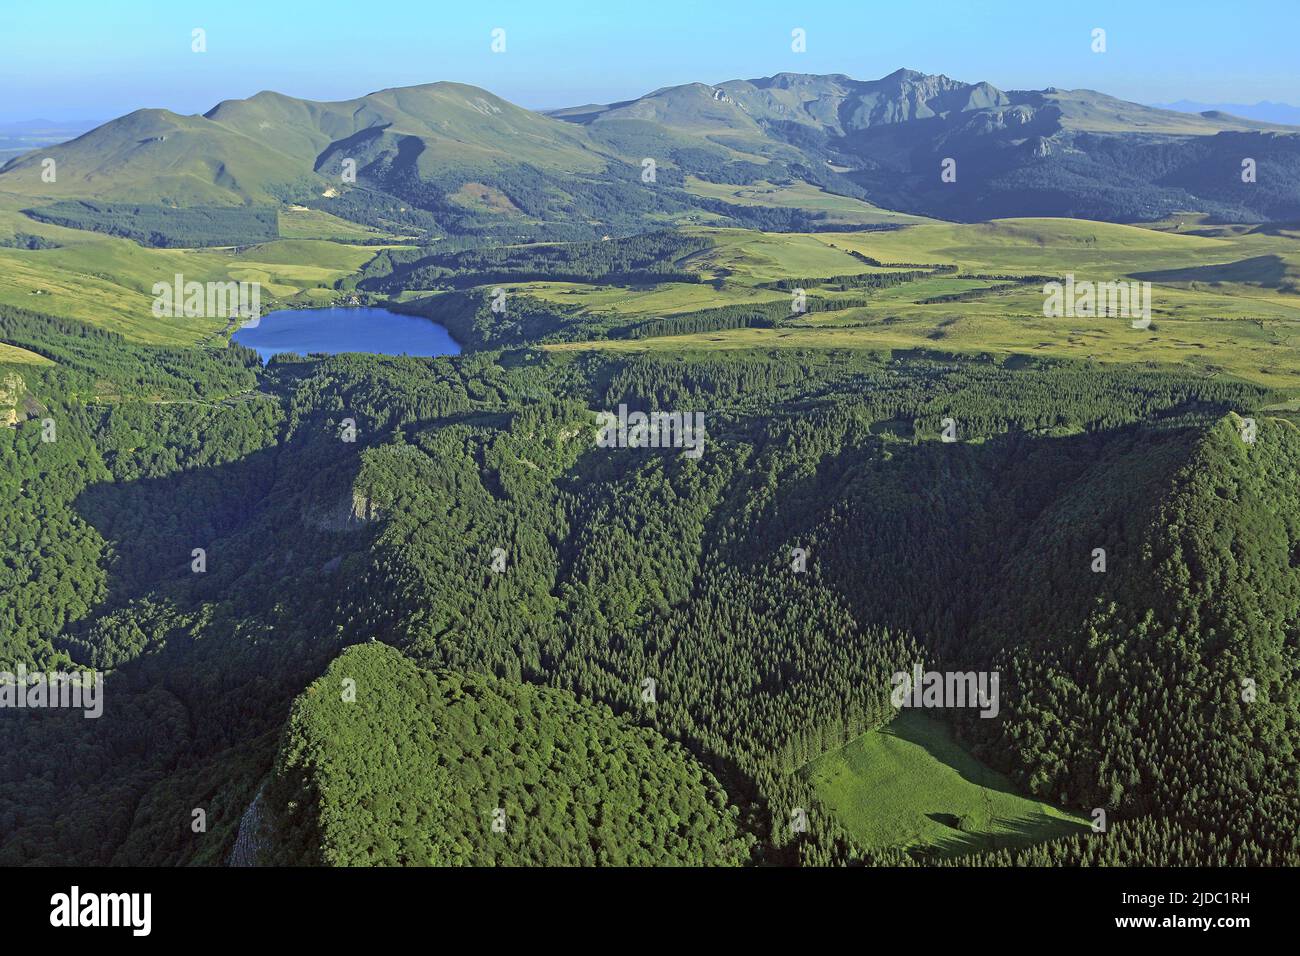 France, Puy-de-Dôme Lake Guéry mountain lake of volcanic origin located in the Massif des Monts Dore, the foreground rocks and Tuilières Sanadoire (aerial photo) Stock Photo